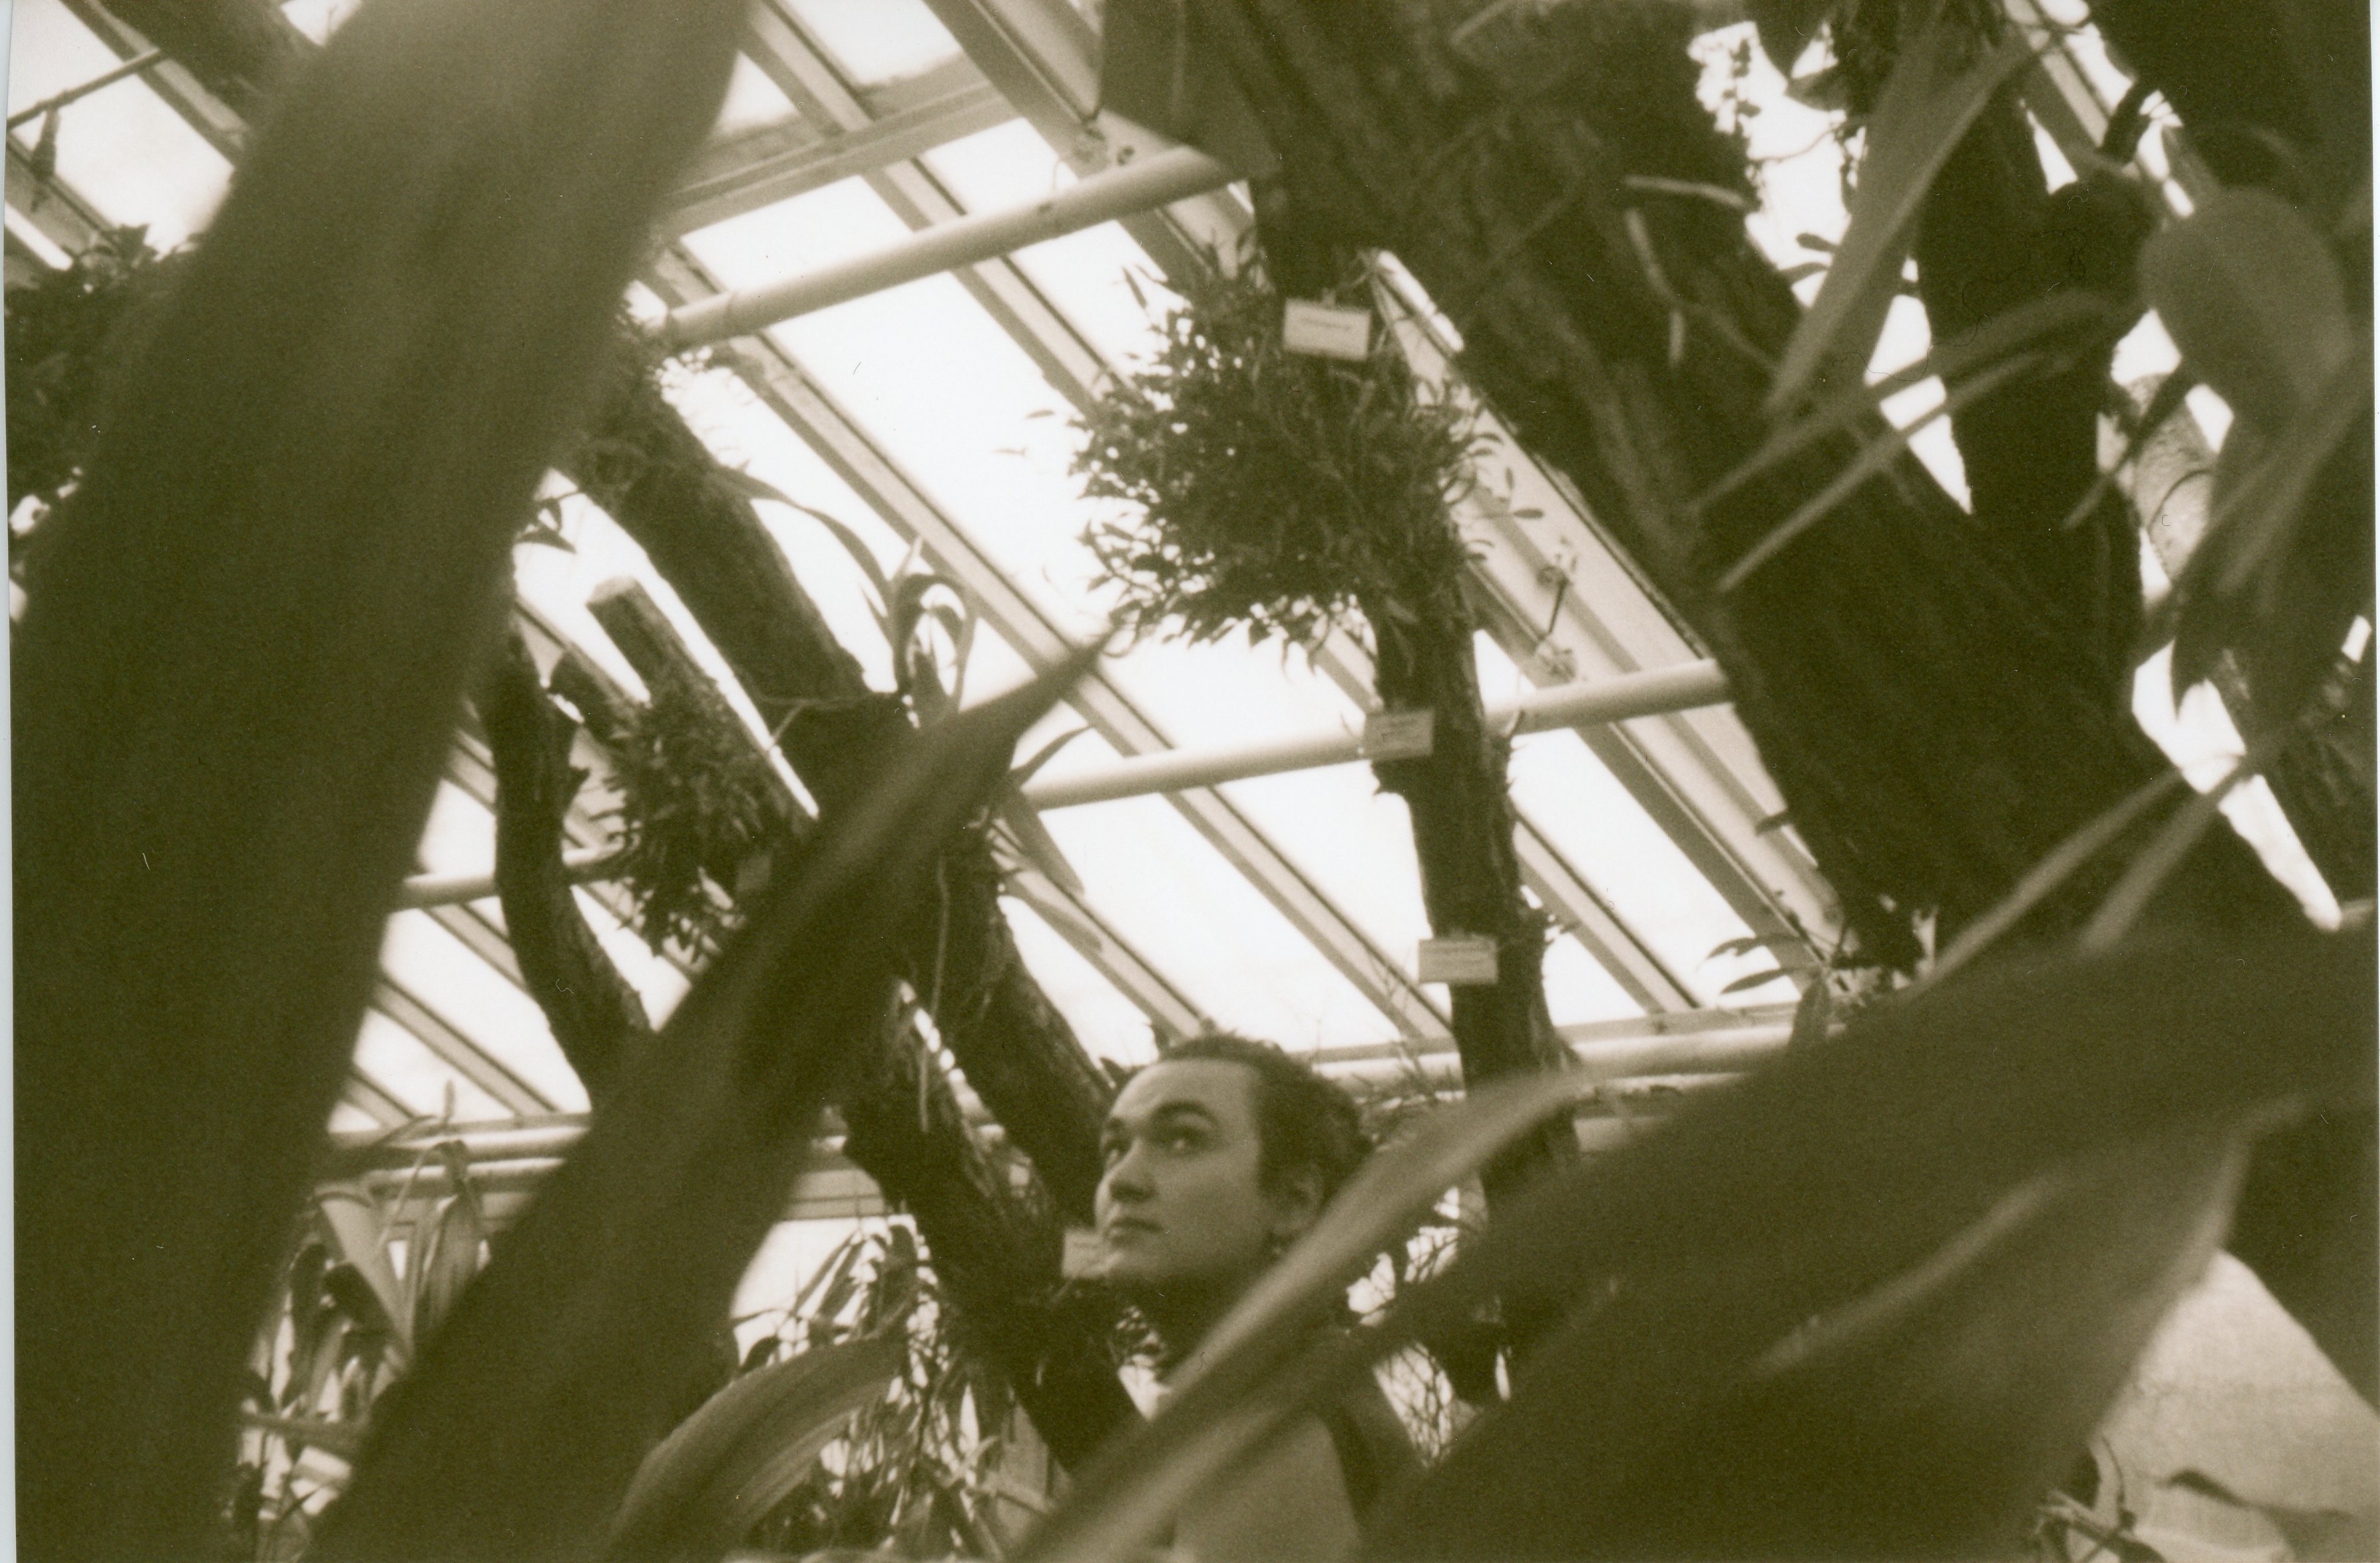 a black and white, sepia toned, 35mm print; at the bottom of the image a woman’s head and shoulders are visible; she is standing in a botanical garden greenhouse facing away from the camera, looking back over her shoulder;  she is partially obscured by large leaves out of focus in the foreground; there are many plants in the background and on the right; the background is the lattice of the greenhouse roof, behind which is overexposed